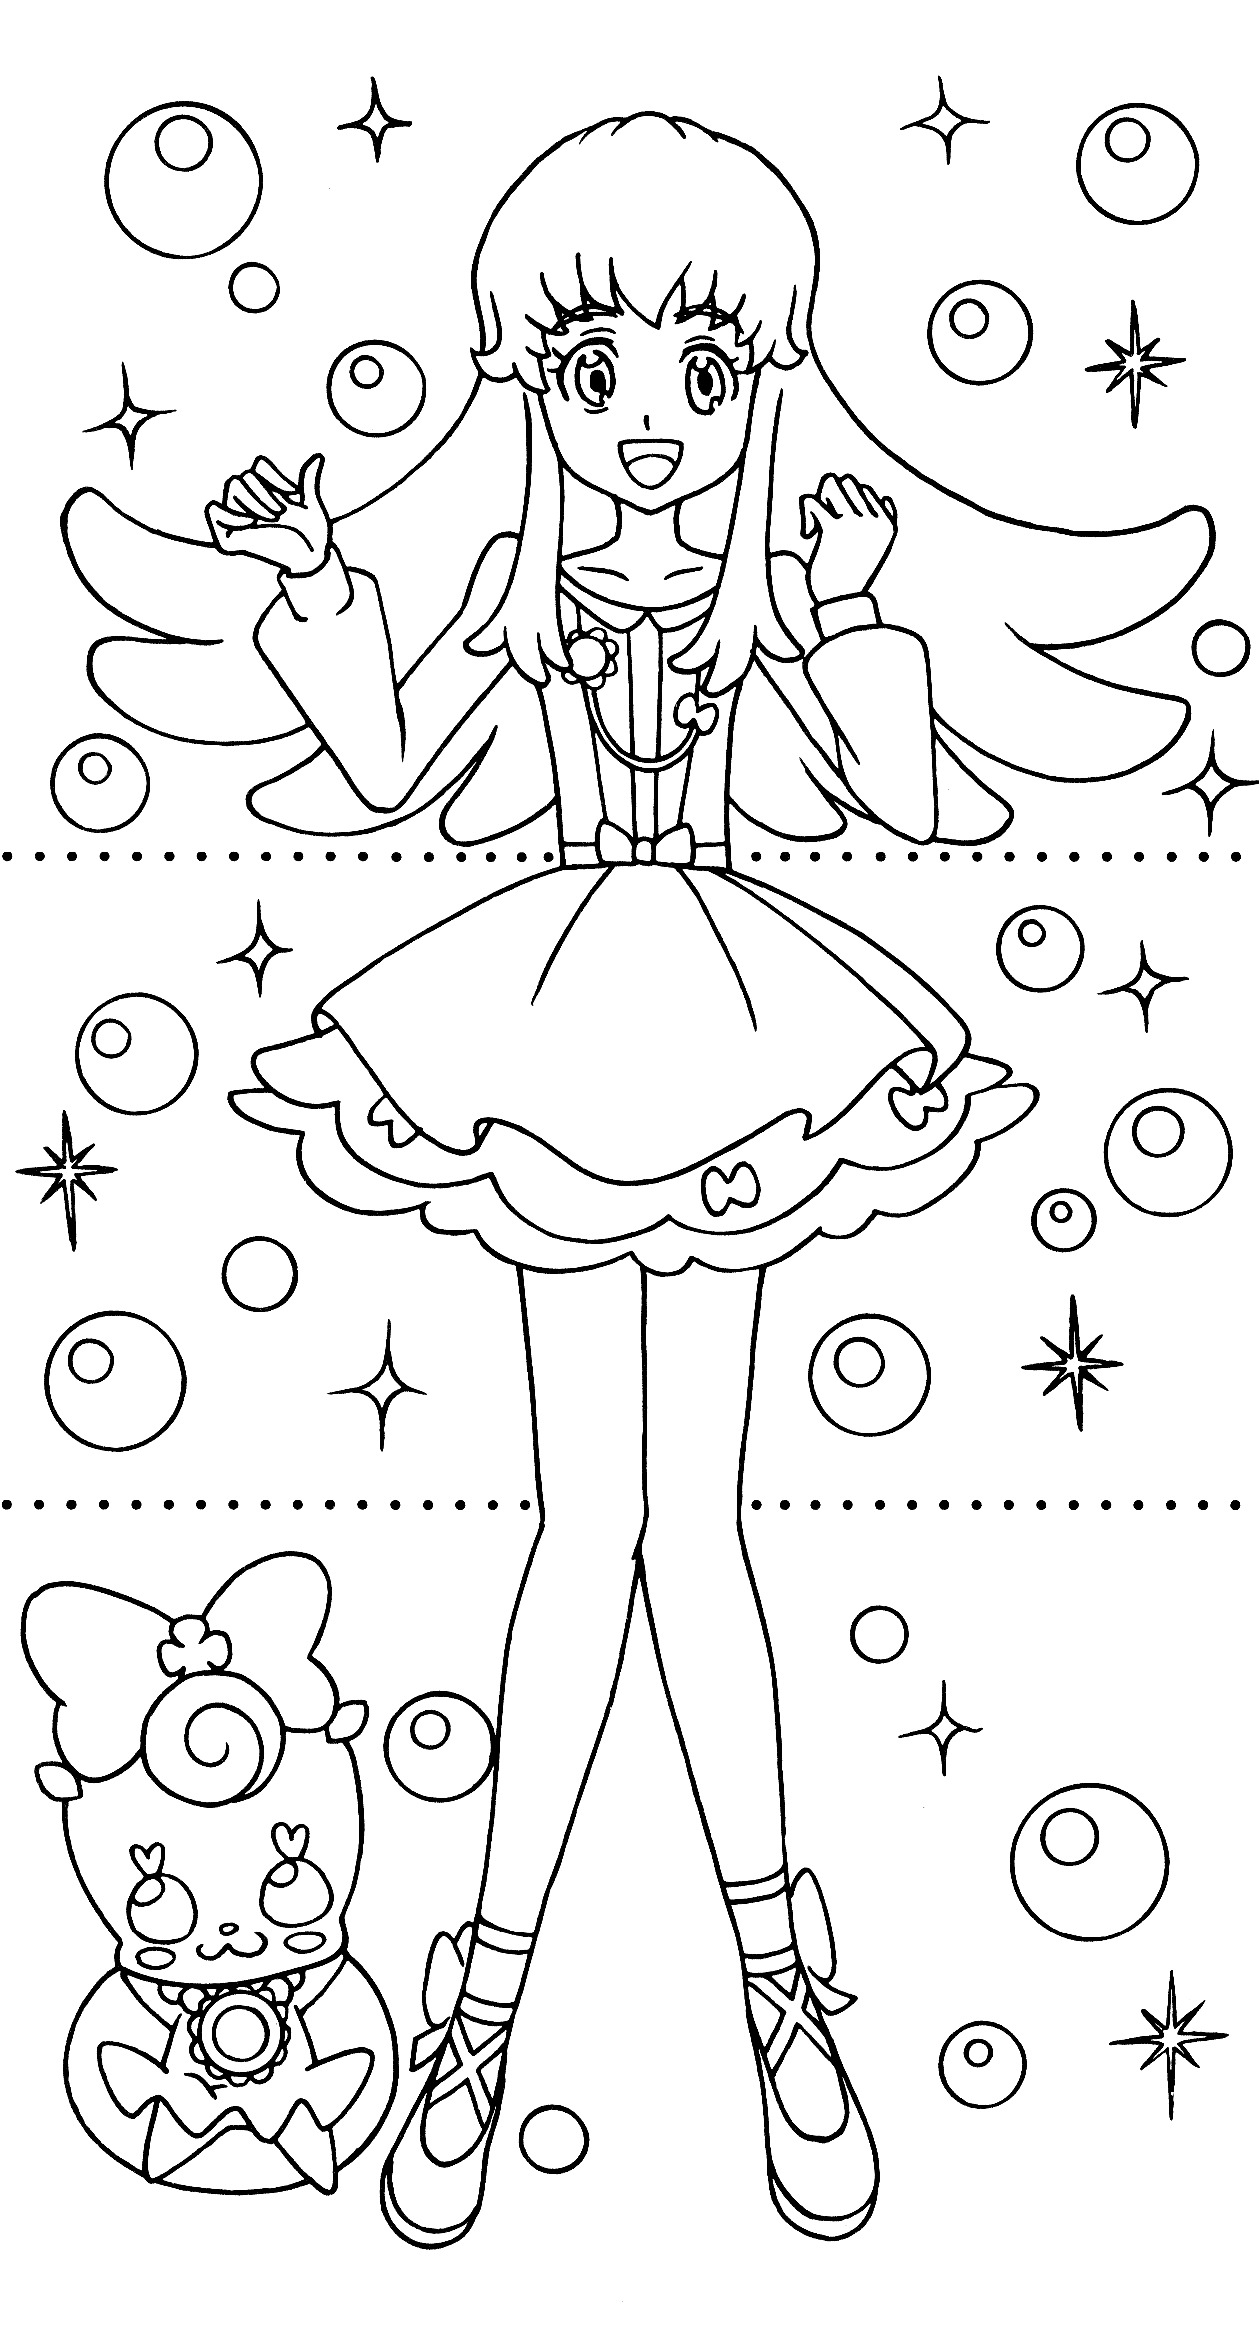 Happiness Charge Precure Dressup Coloring Book 19